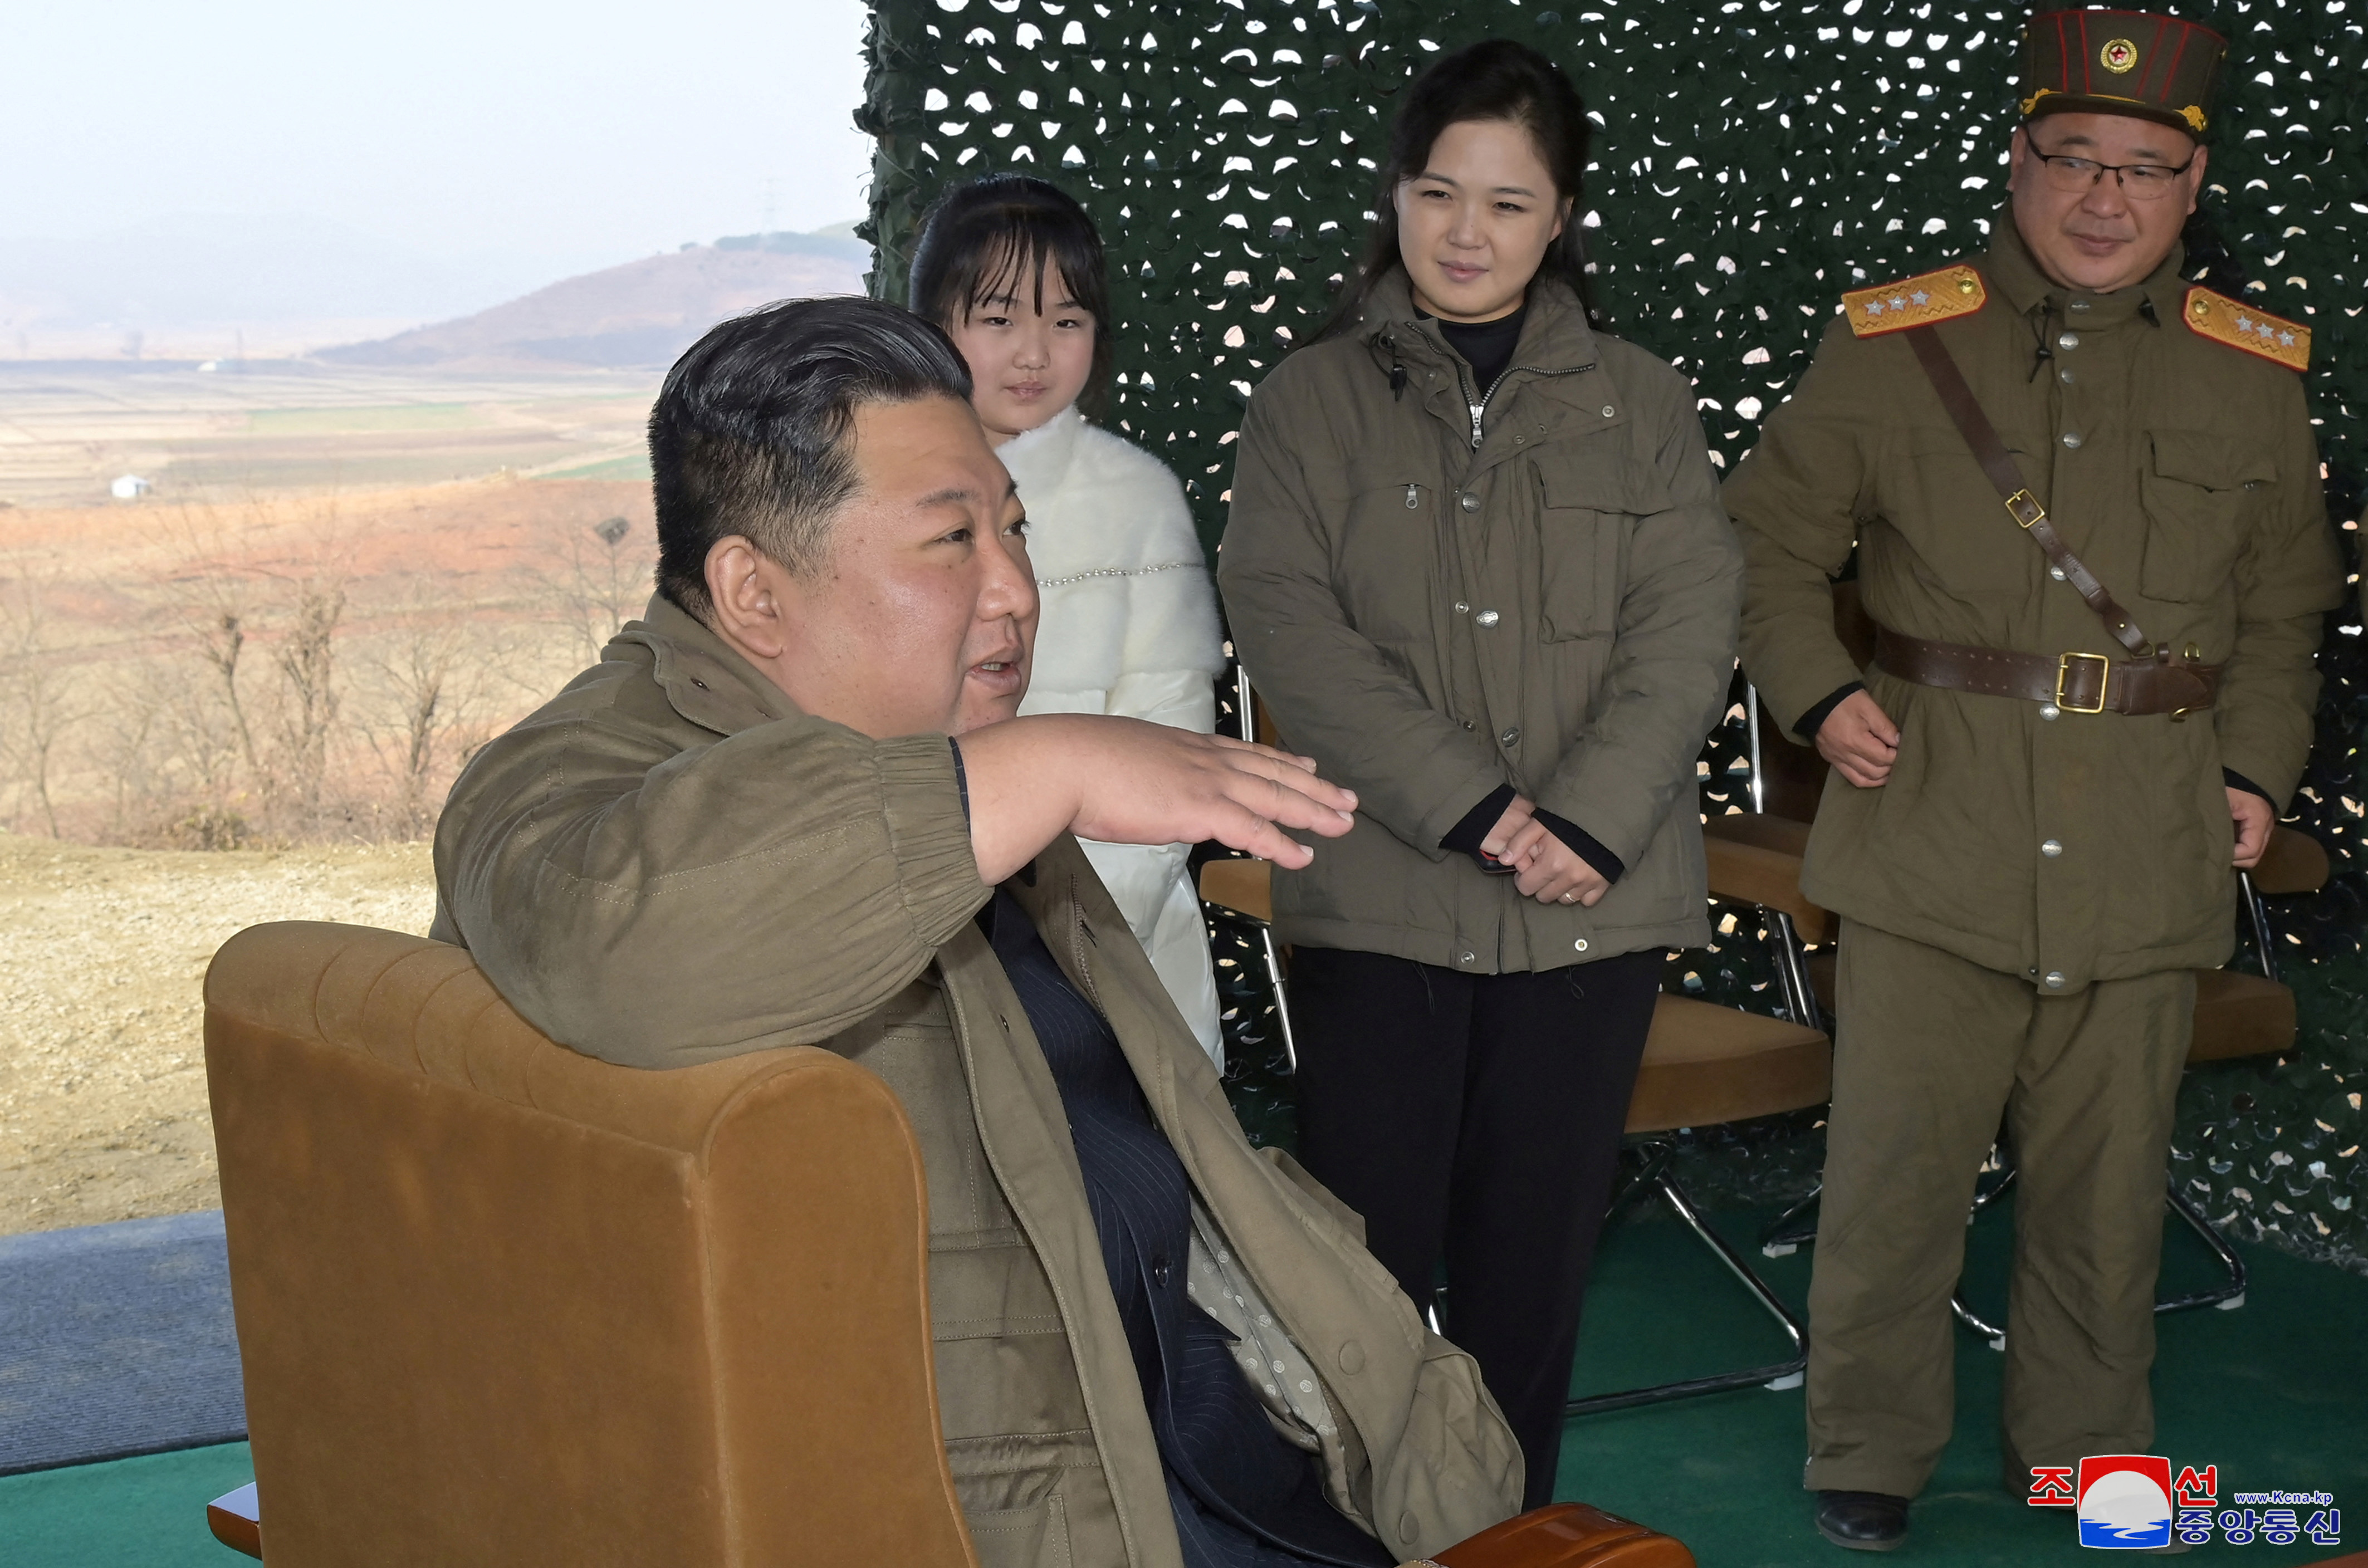 Kim Jong-un was surrounded by his wife, his daughter and his advisers during the launch this Friday (REUTERS).